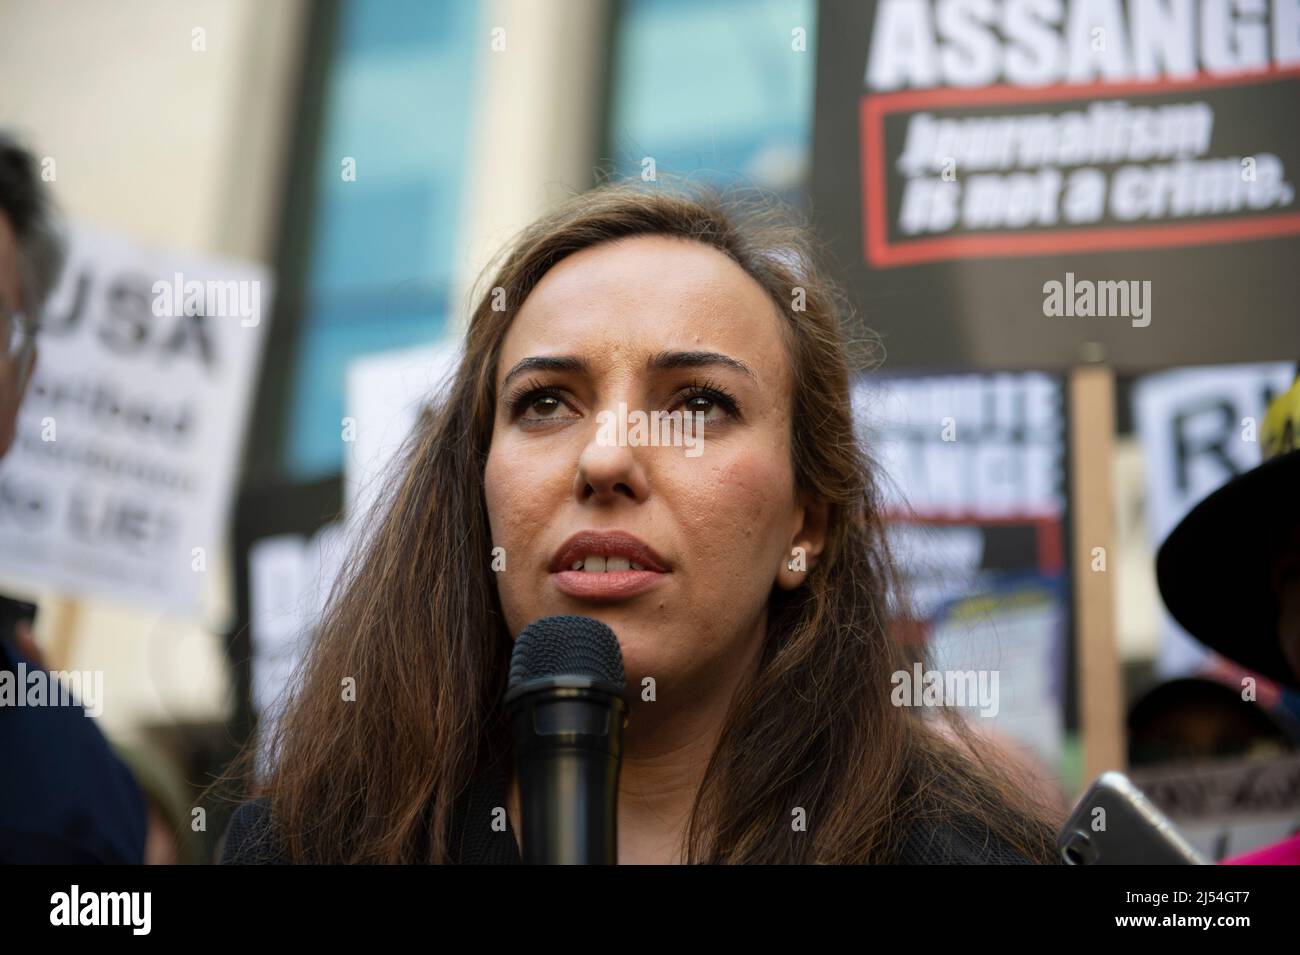 London, UK, London, UK. 20th Apr, 2022. Stella Assange, wife of WikiLeaks Co-founder Julian Assange speaks outside Westminister Magistrates Court following formal approval for the extradition of Julian Assange to the US on espionage charges, a decision to be made by the UK home secretary, Priti Patel. Credit: claire doherty/Alamy Live News Stock Photo